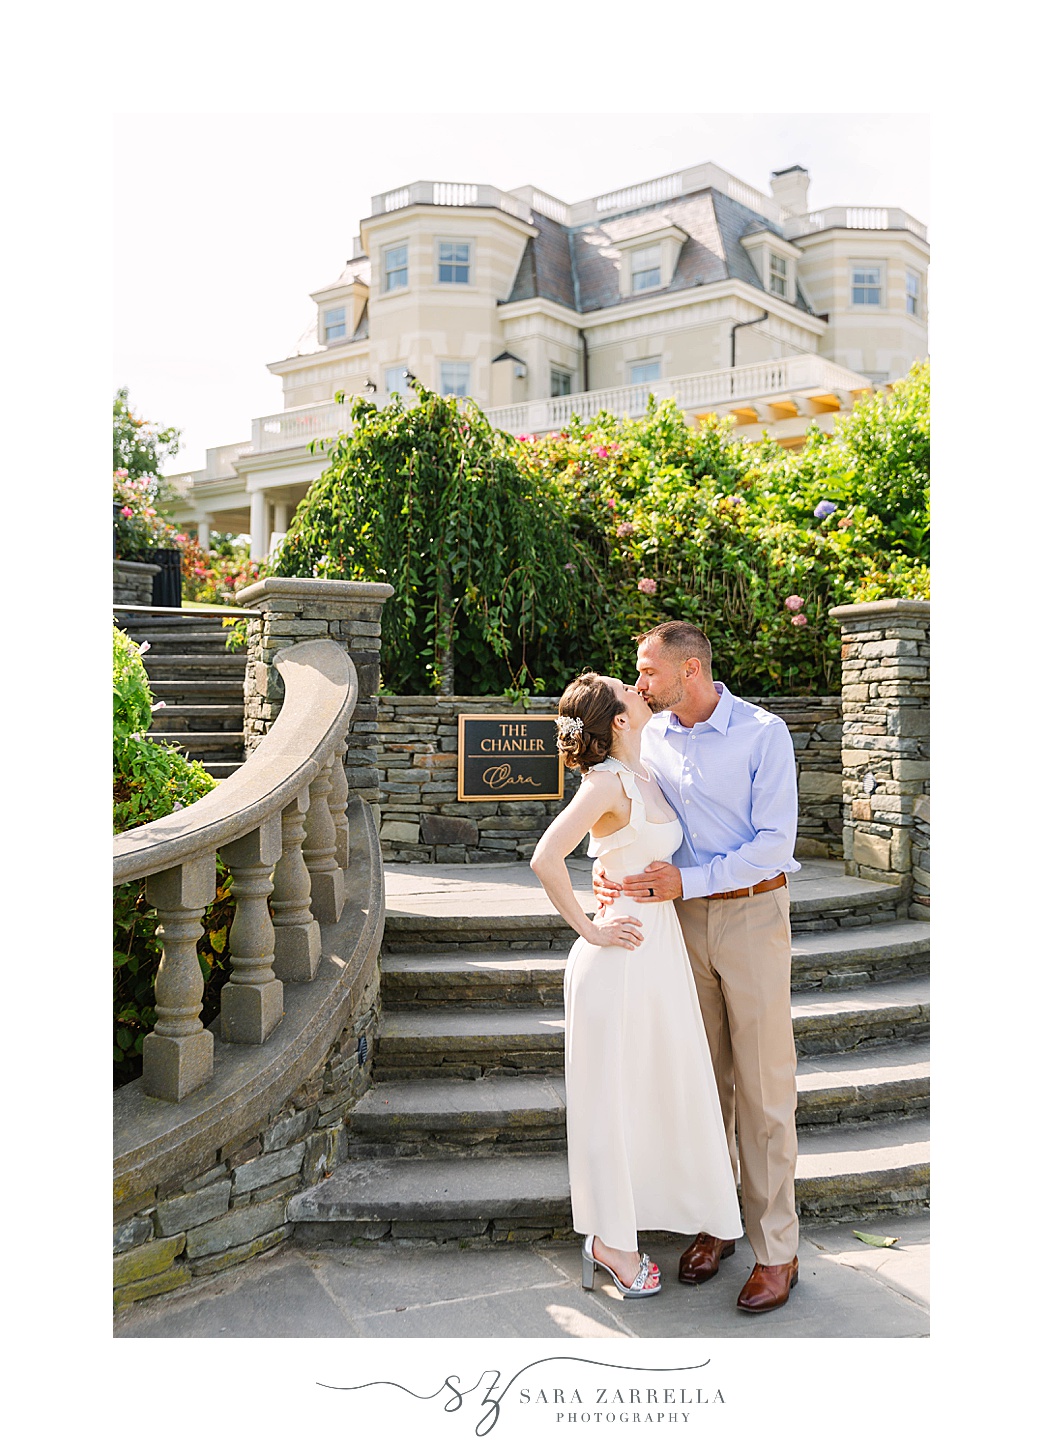 couple kisses by staircase at the Chanler at Cliff Walk